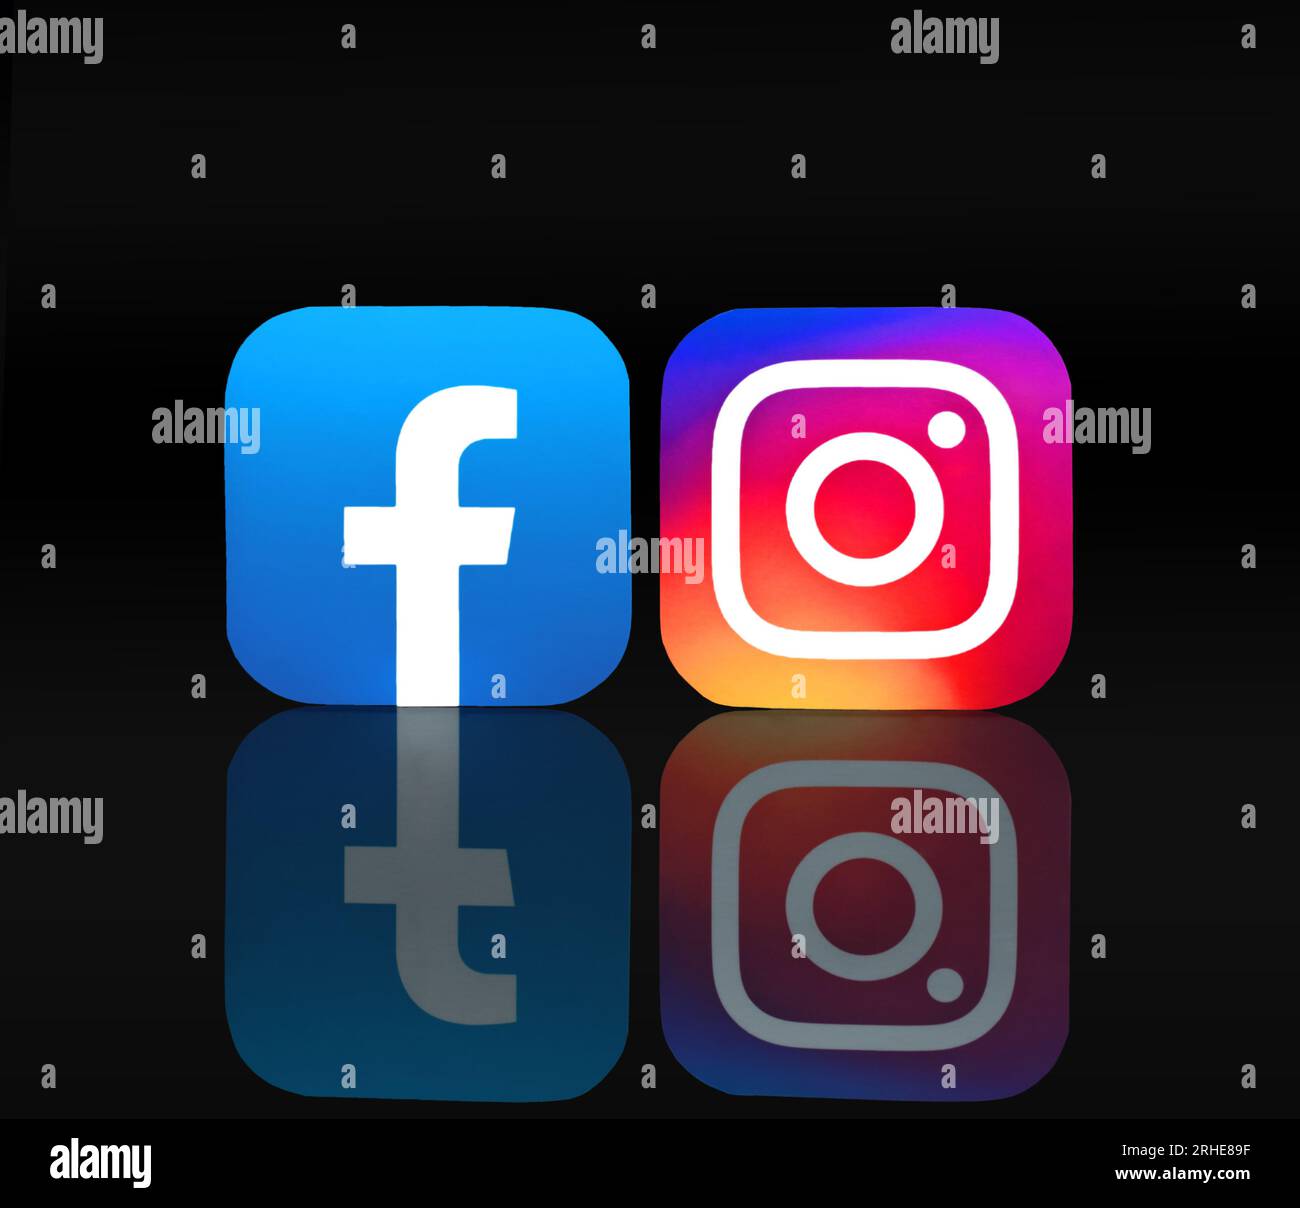 Kiev, Ukraine - September 19, 2022: Facebook and Instagram paper icons with reflection on black background Stock Photo